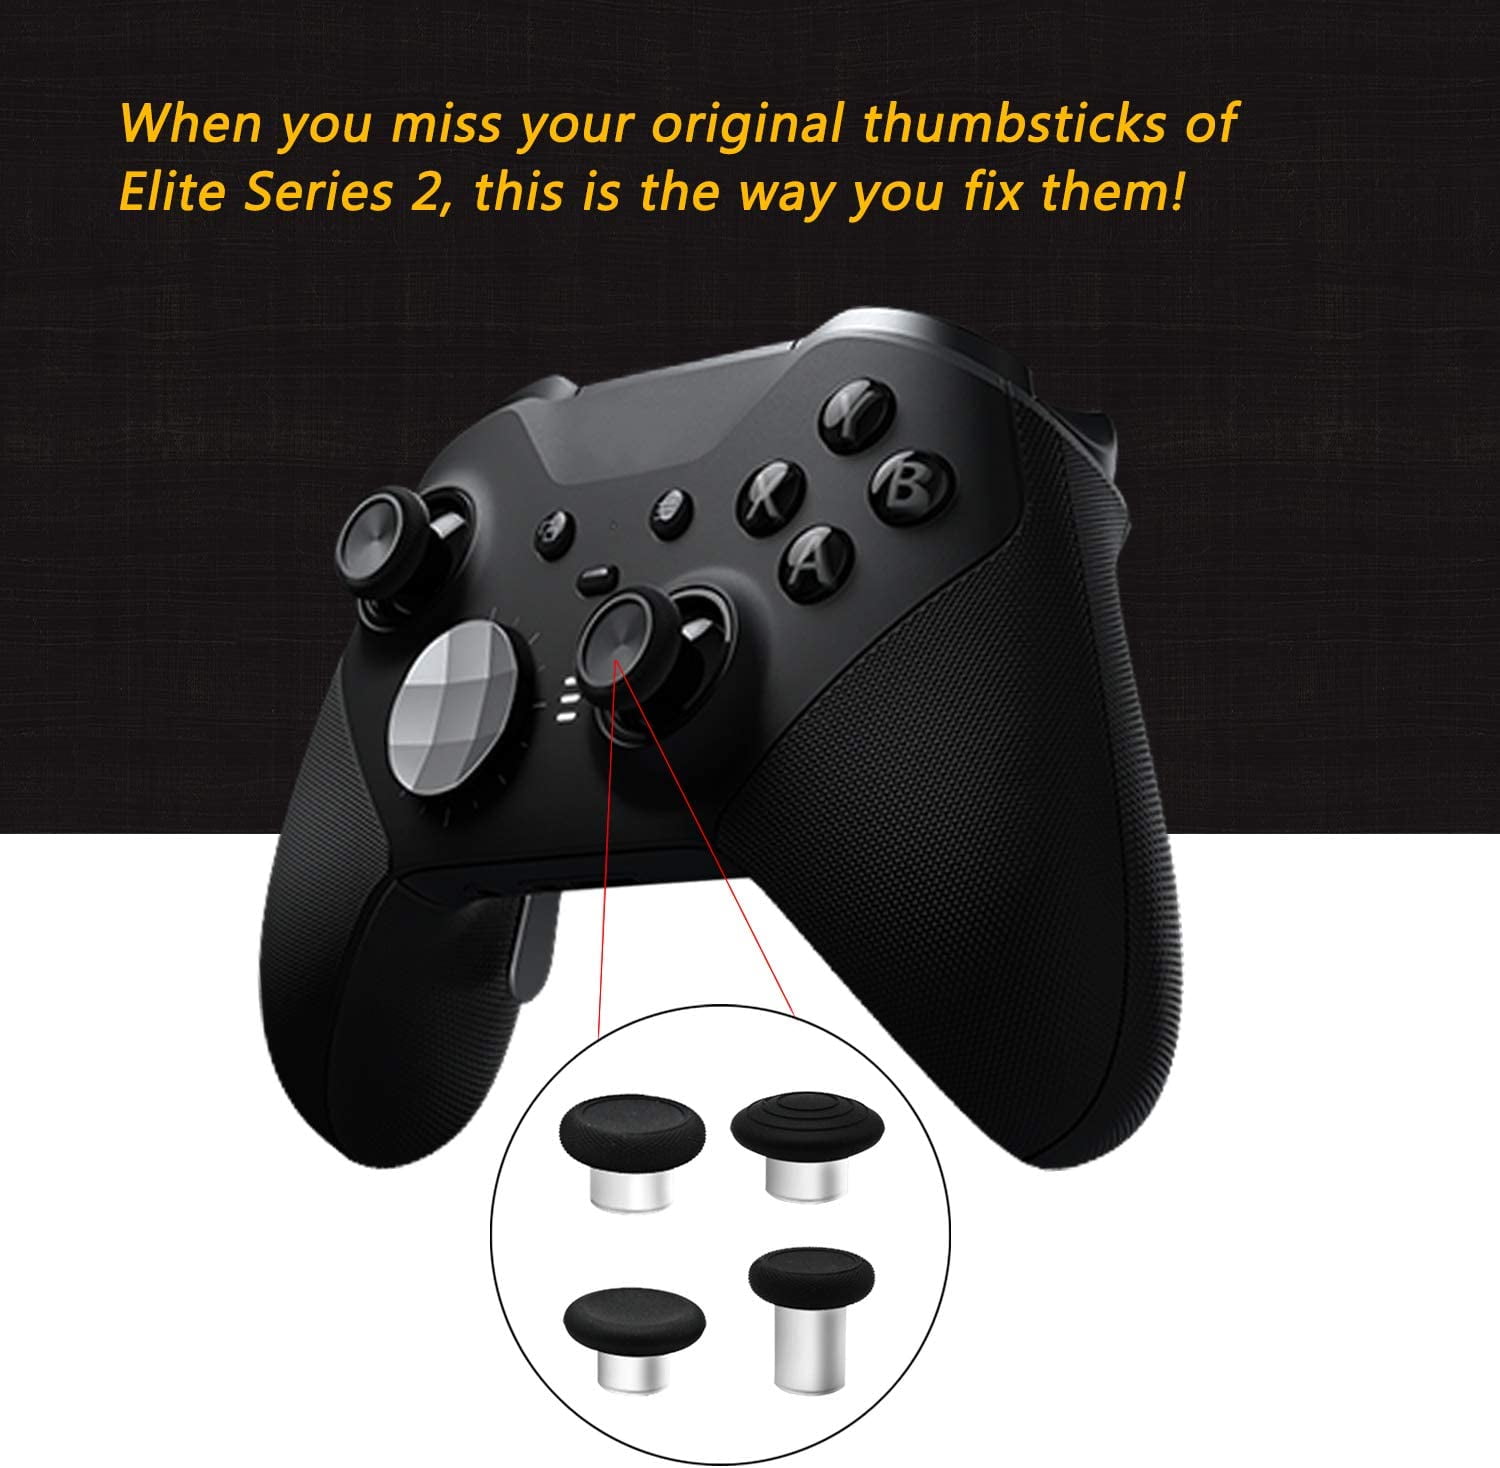 6 in 1 Swap Thumbsticks, Replacement Magnetic Joysticks for Xbox